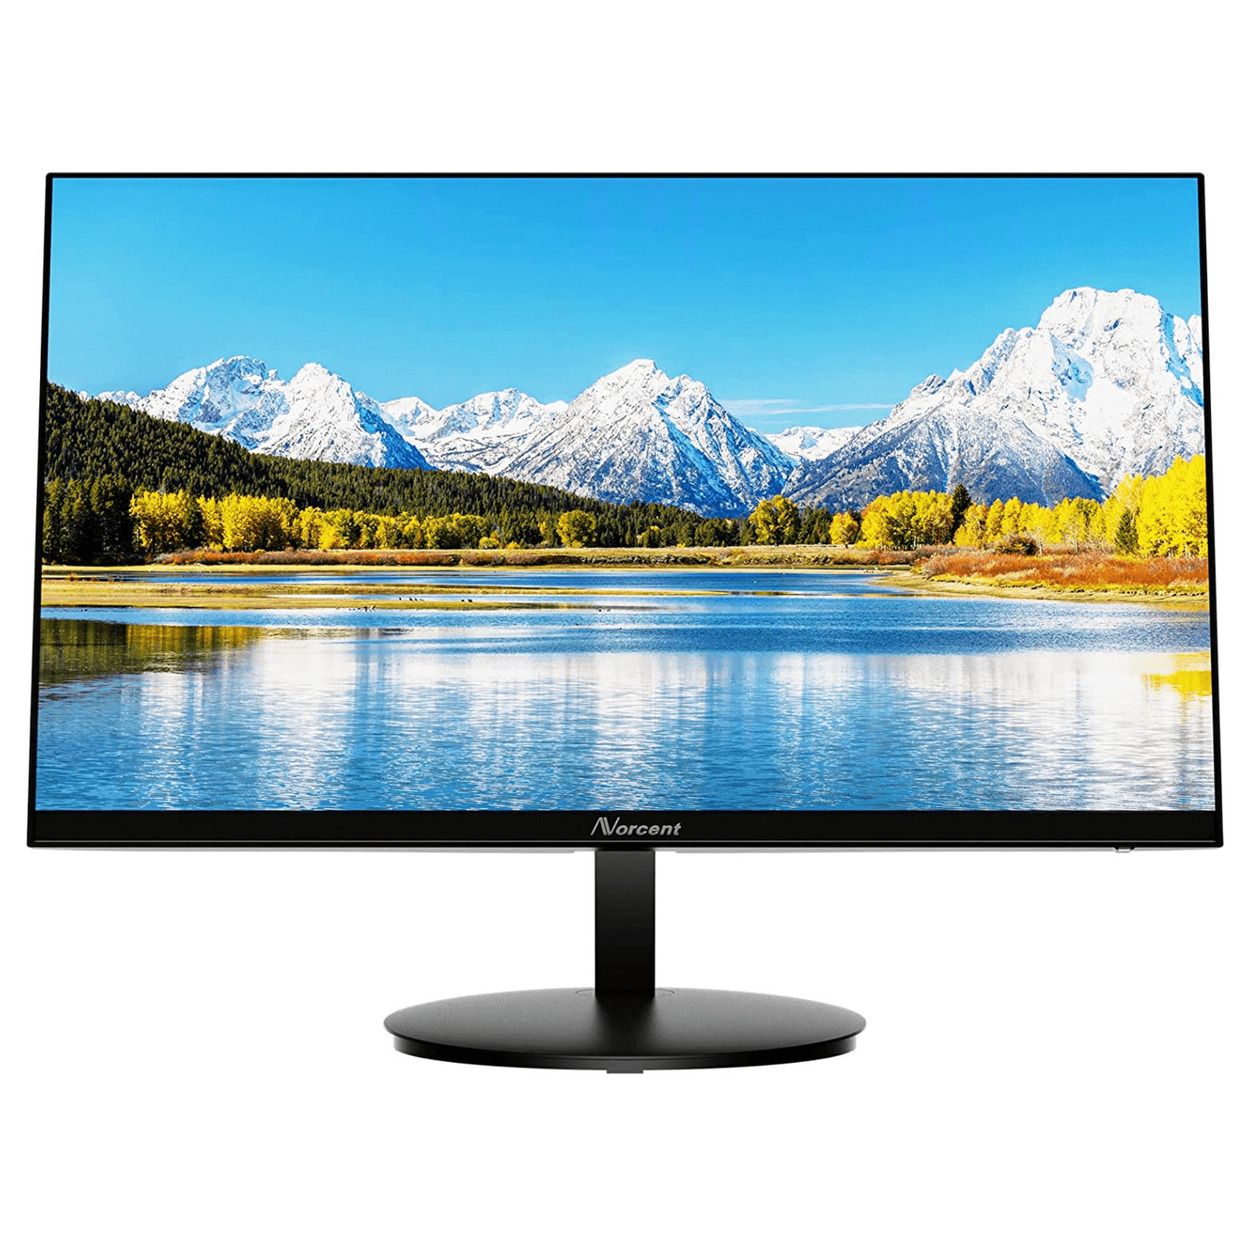 Norcent 24 Inch Frameless Computer Monitor FHD 75HZ VA With Built-In Speakers